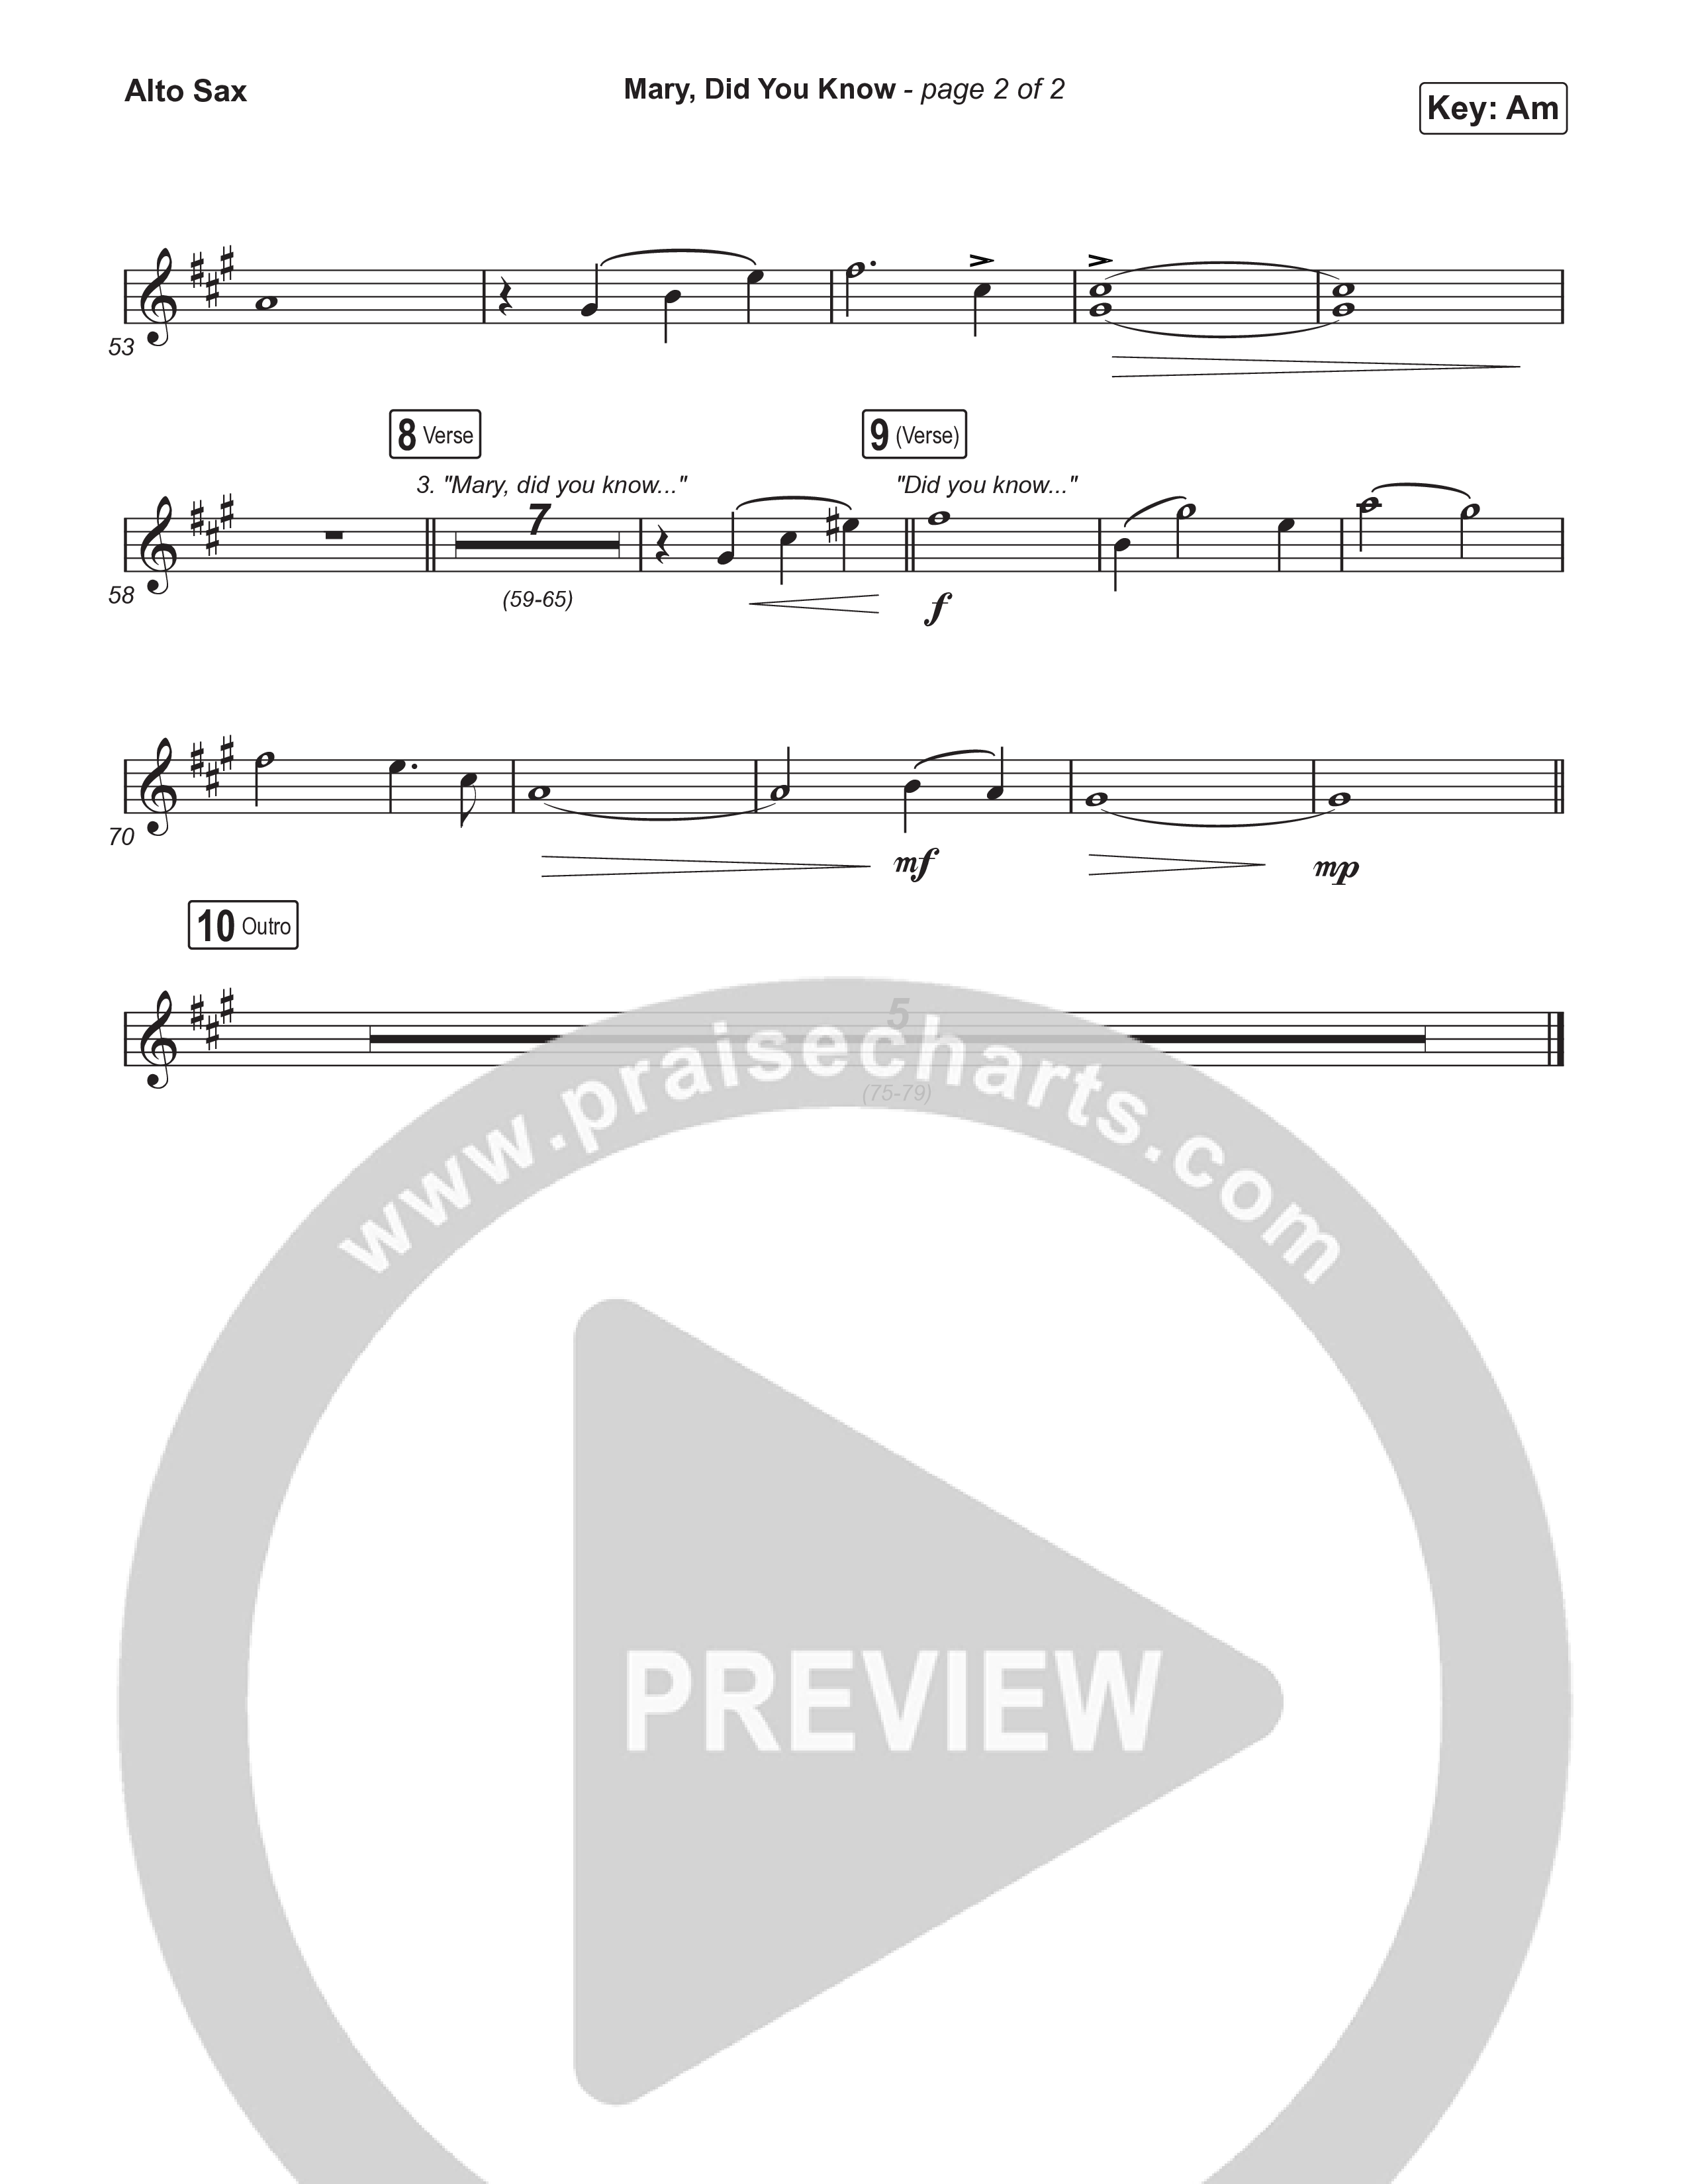 Mary Did You Know (Unison/2-Part Choir) Sax Pack (Anne Wilson / Arr. Luke Gambill)